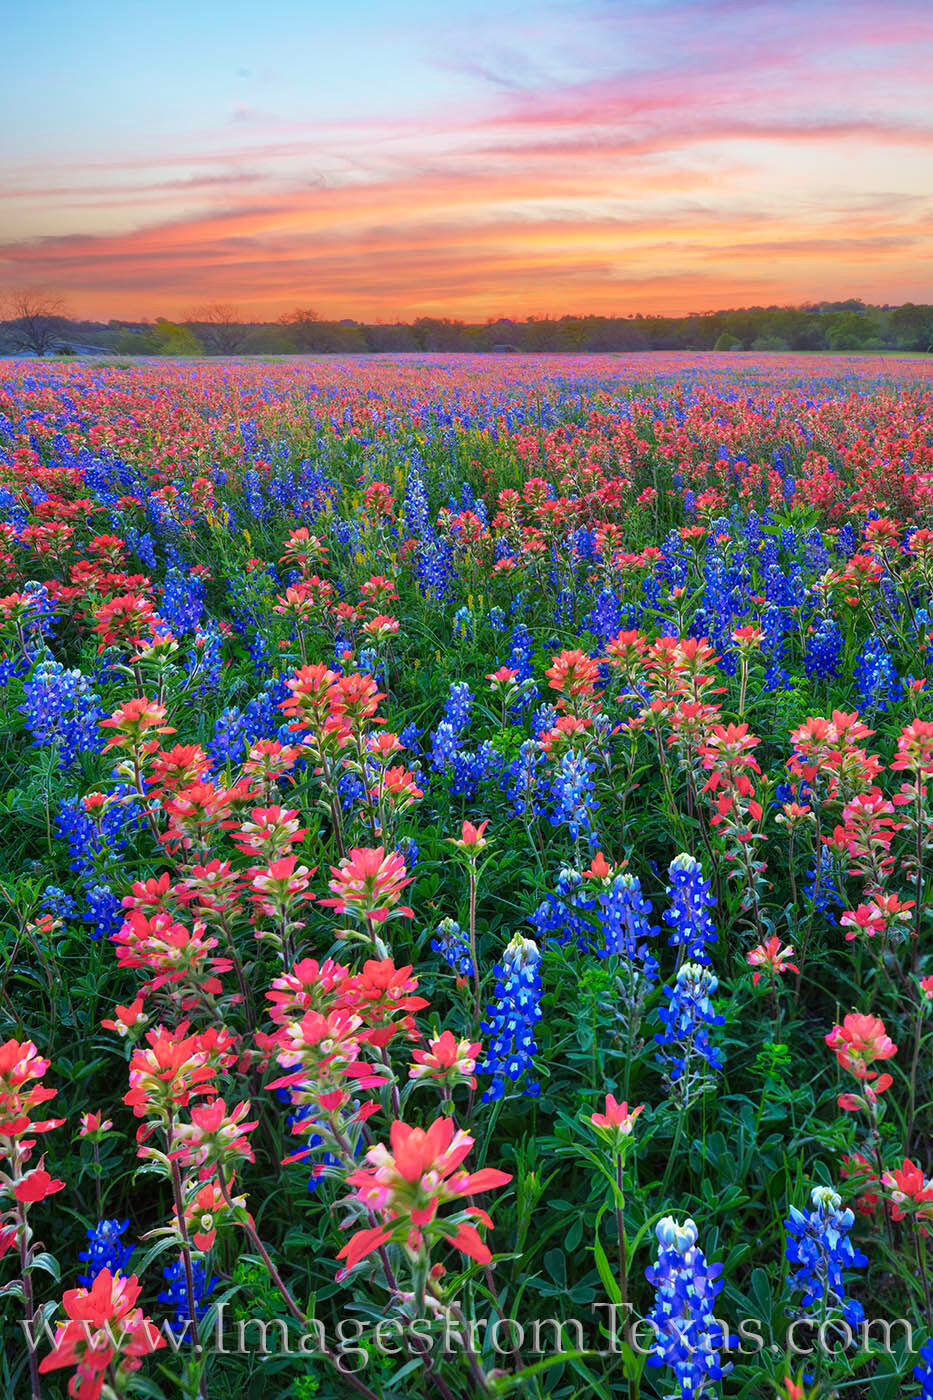 Reds and blues of Texas wildflowers cover a field in Washington County on a beautiful Spring evening.